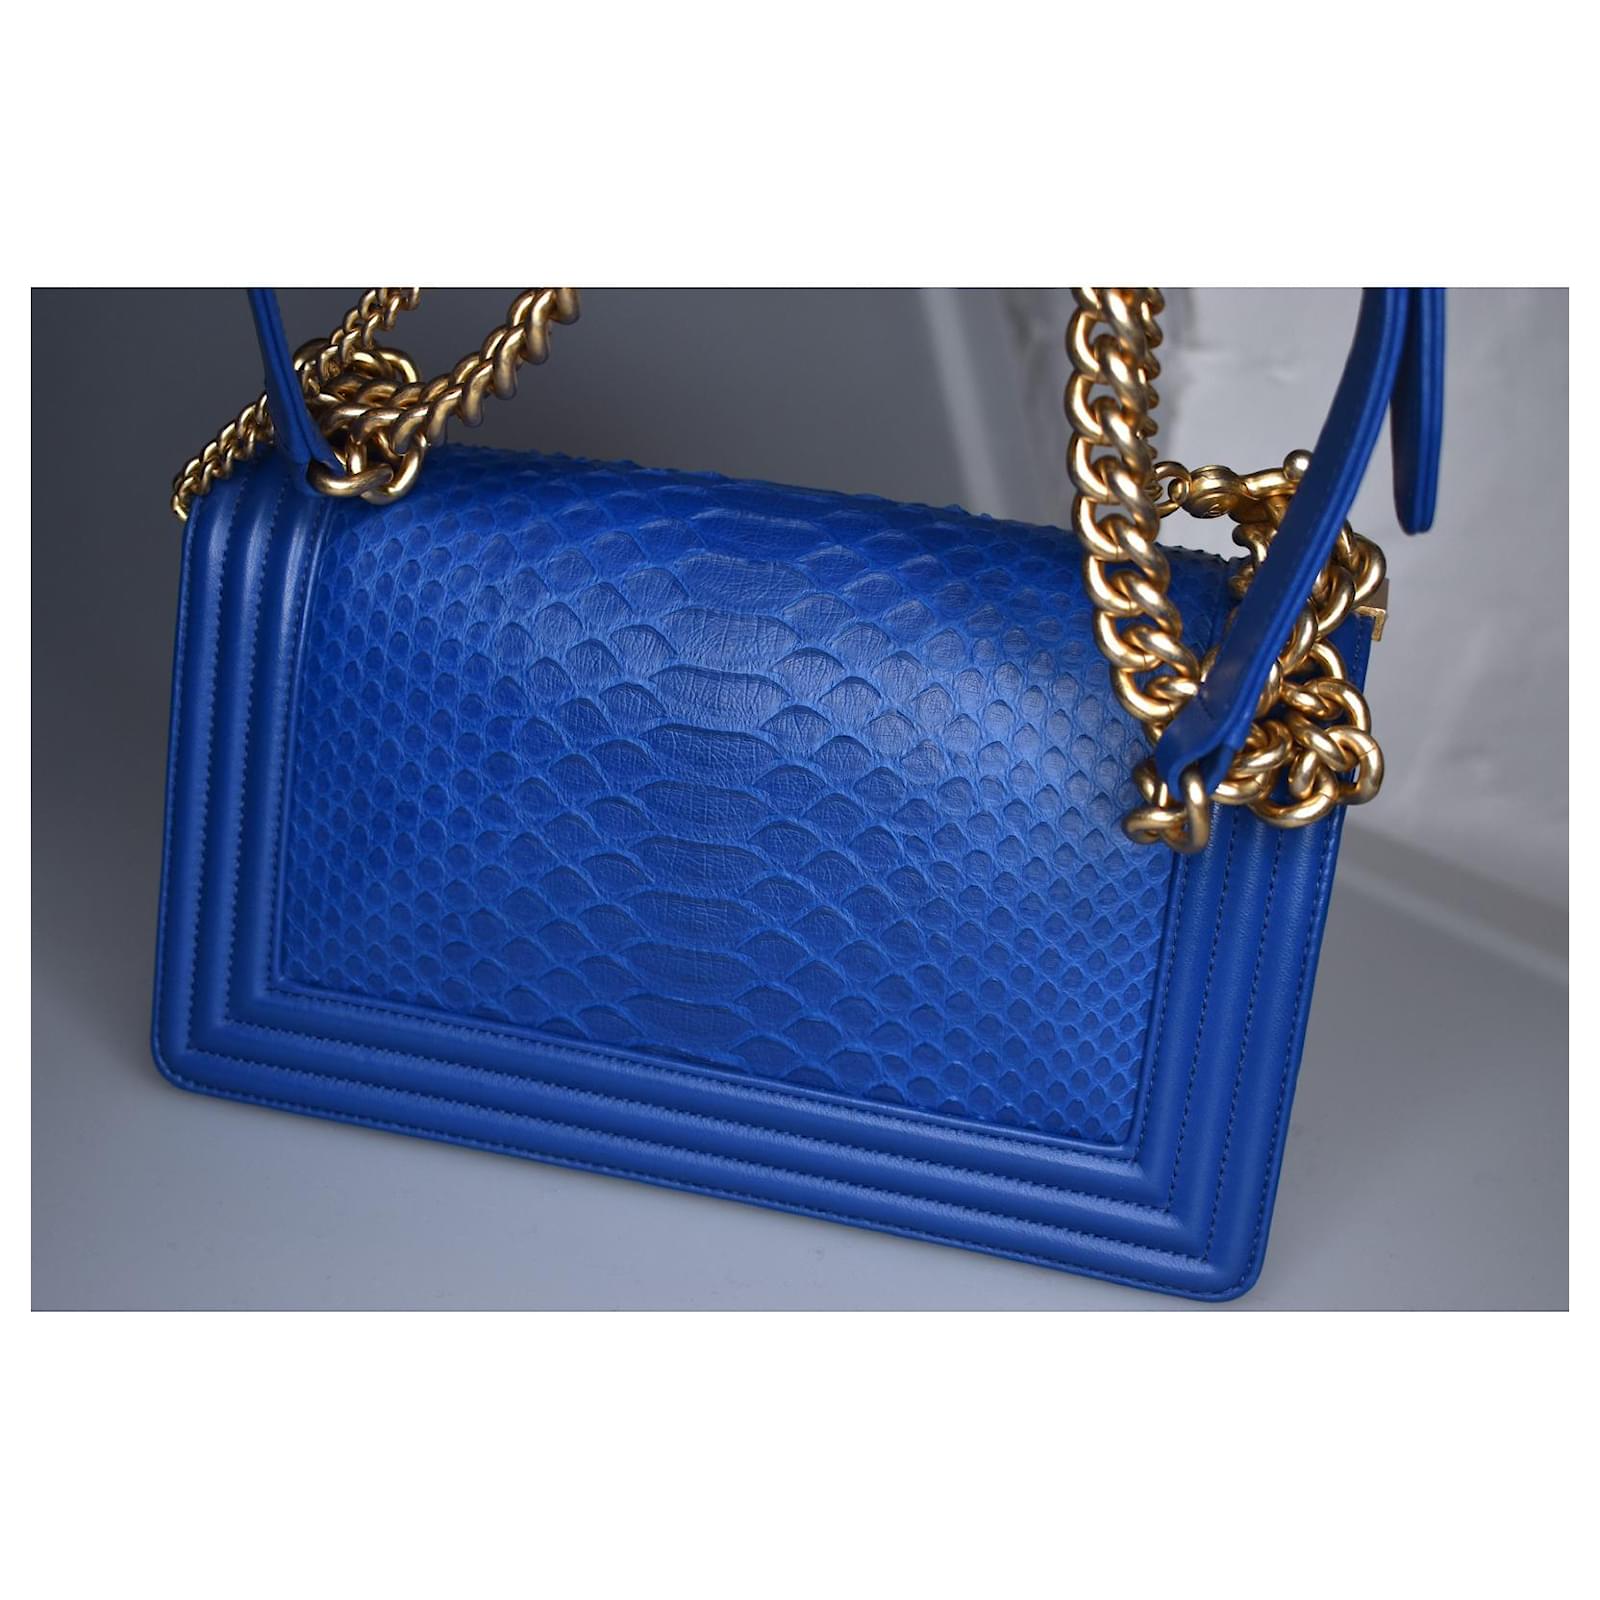 Authentic CHANEL BOY Blue Quilted Leather Gold Chain Shoulder Flap Bag  #42074